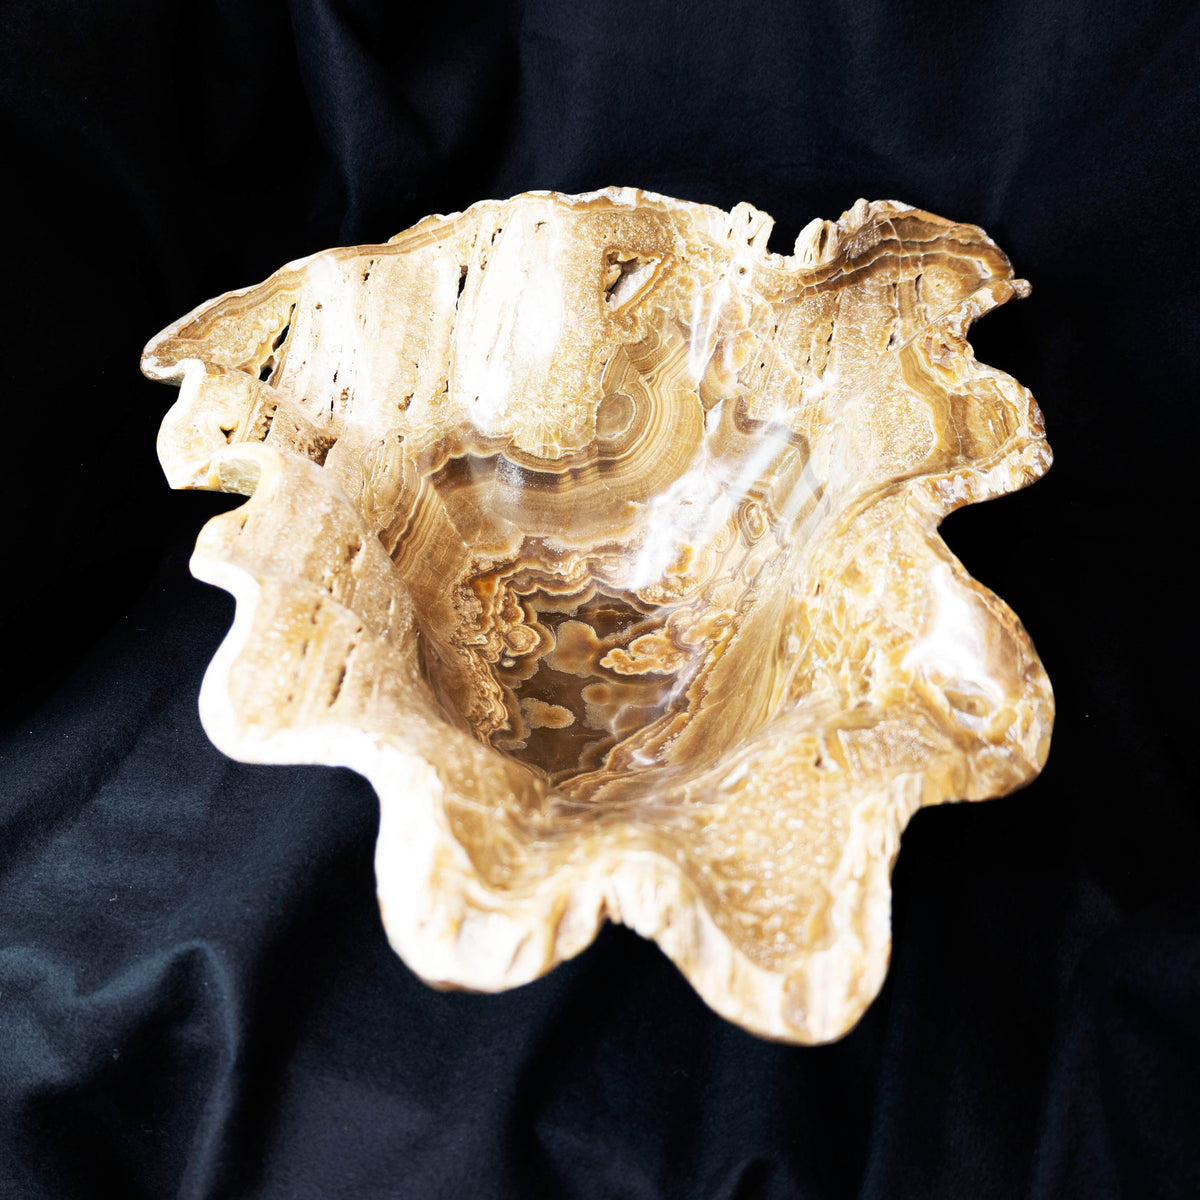 Hand-carved onyx bowl